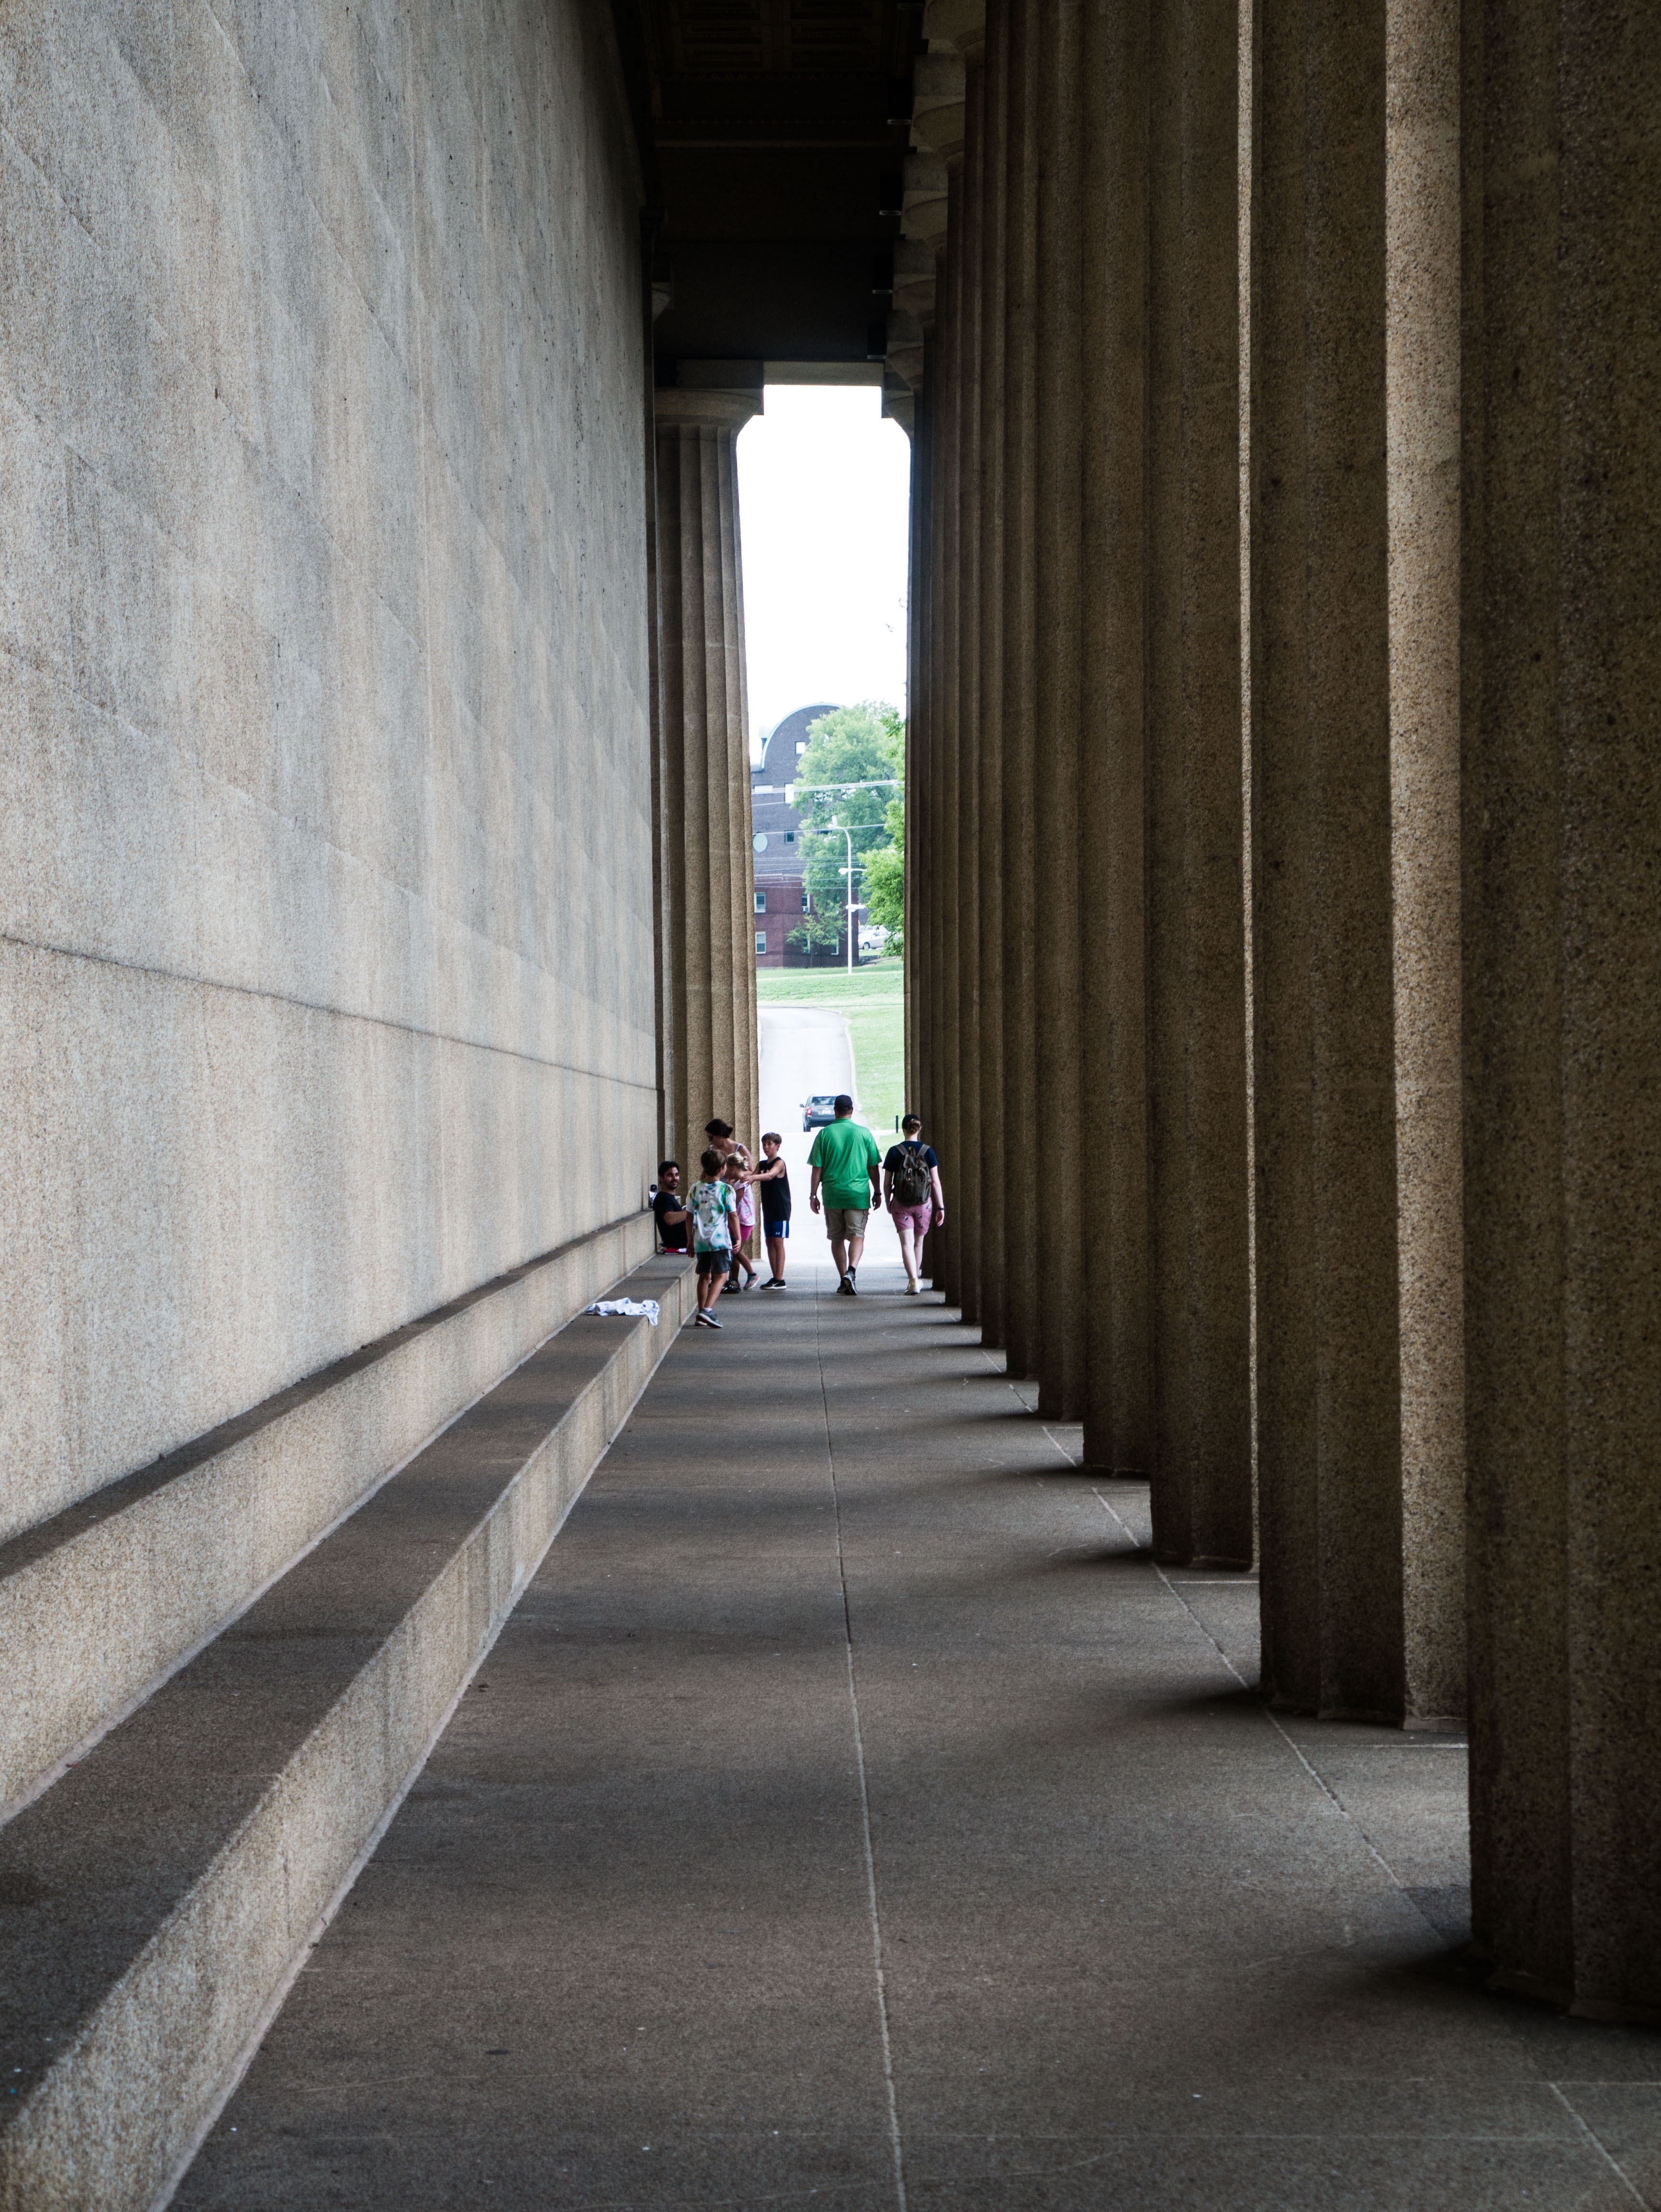 People walking down the colonnade at the Nashville Parthenon